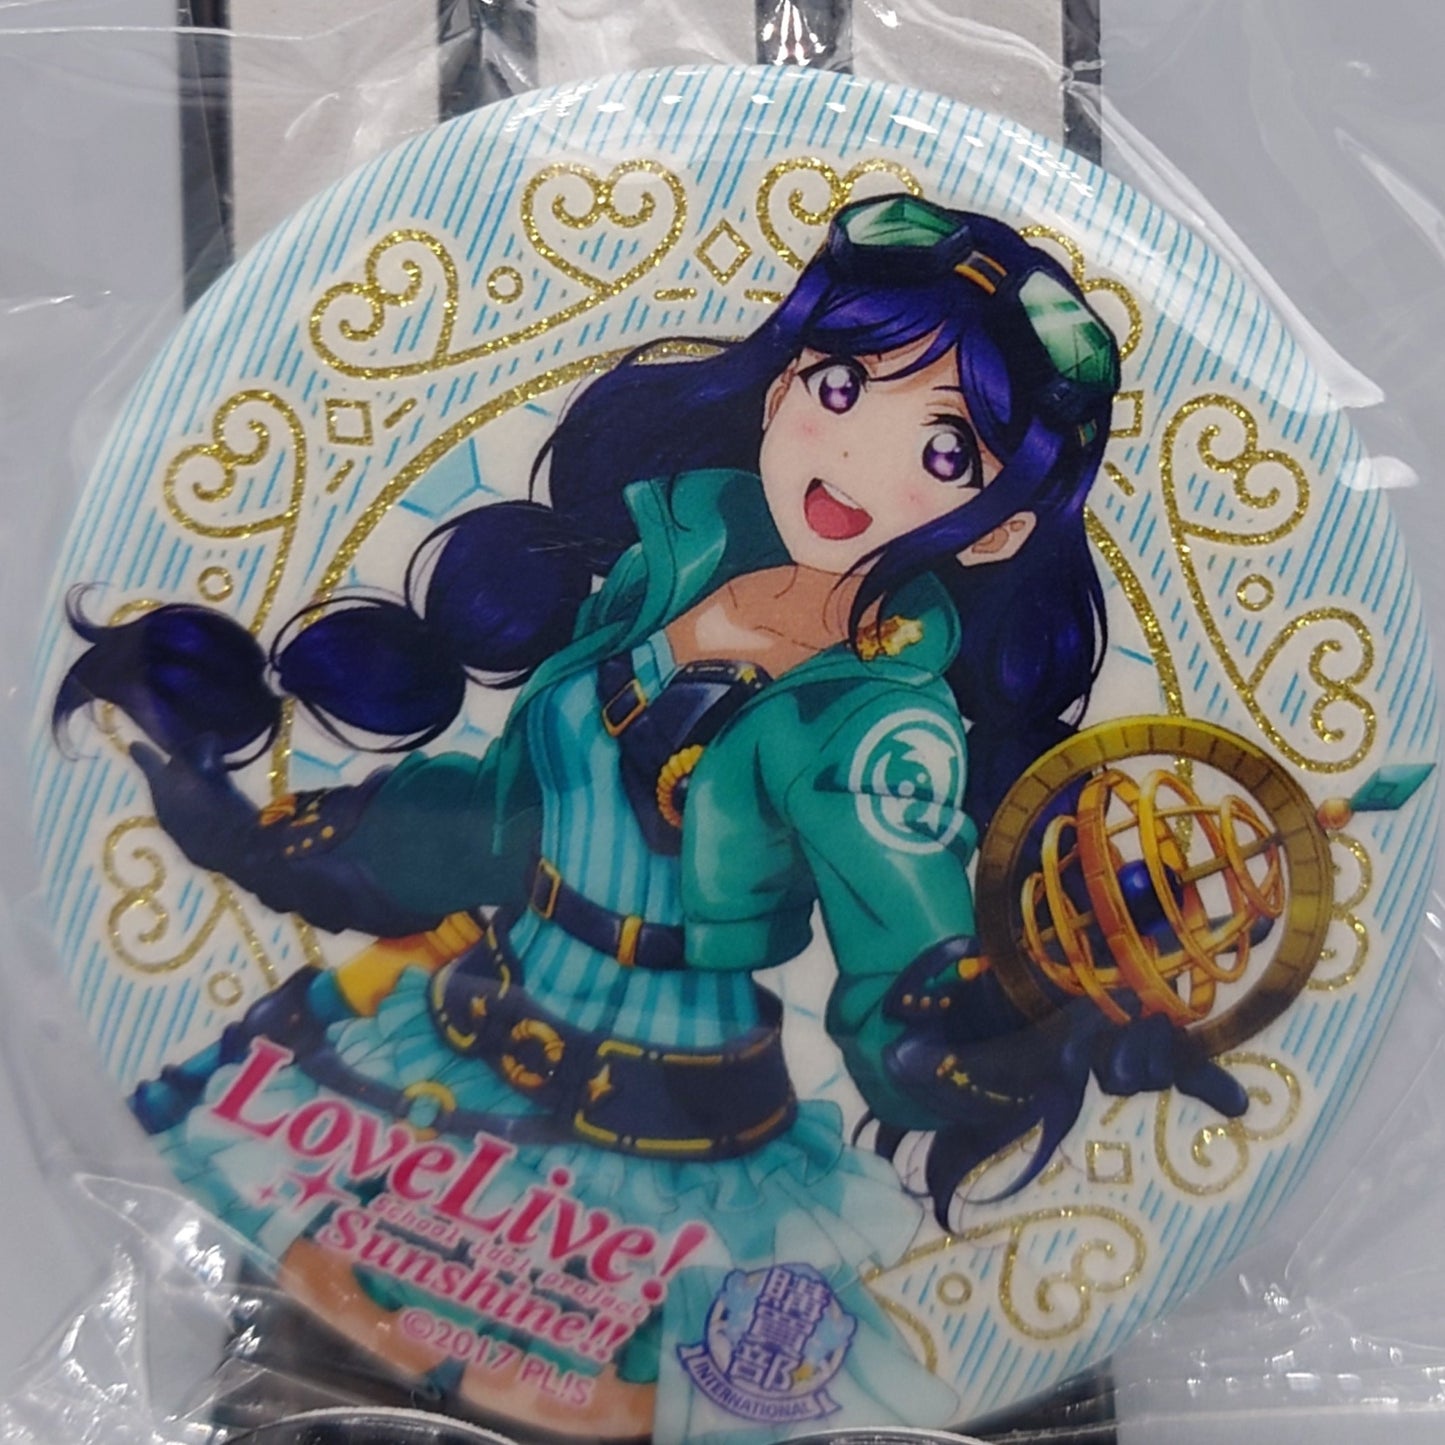 US Anime Cons LoveLive! Sunshine Tin Buttons